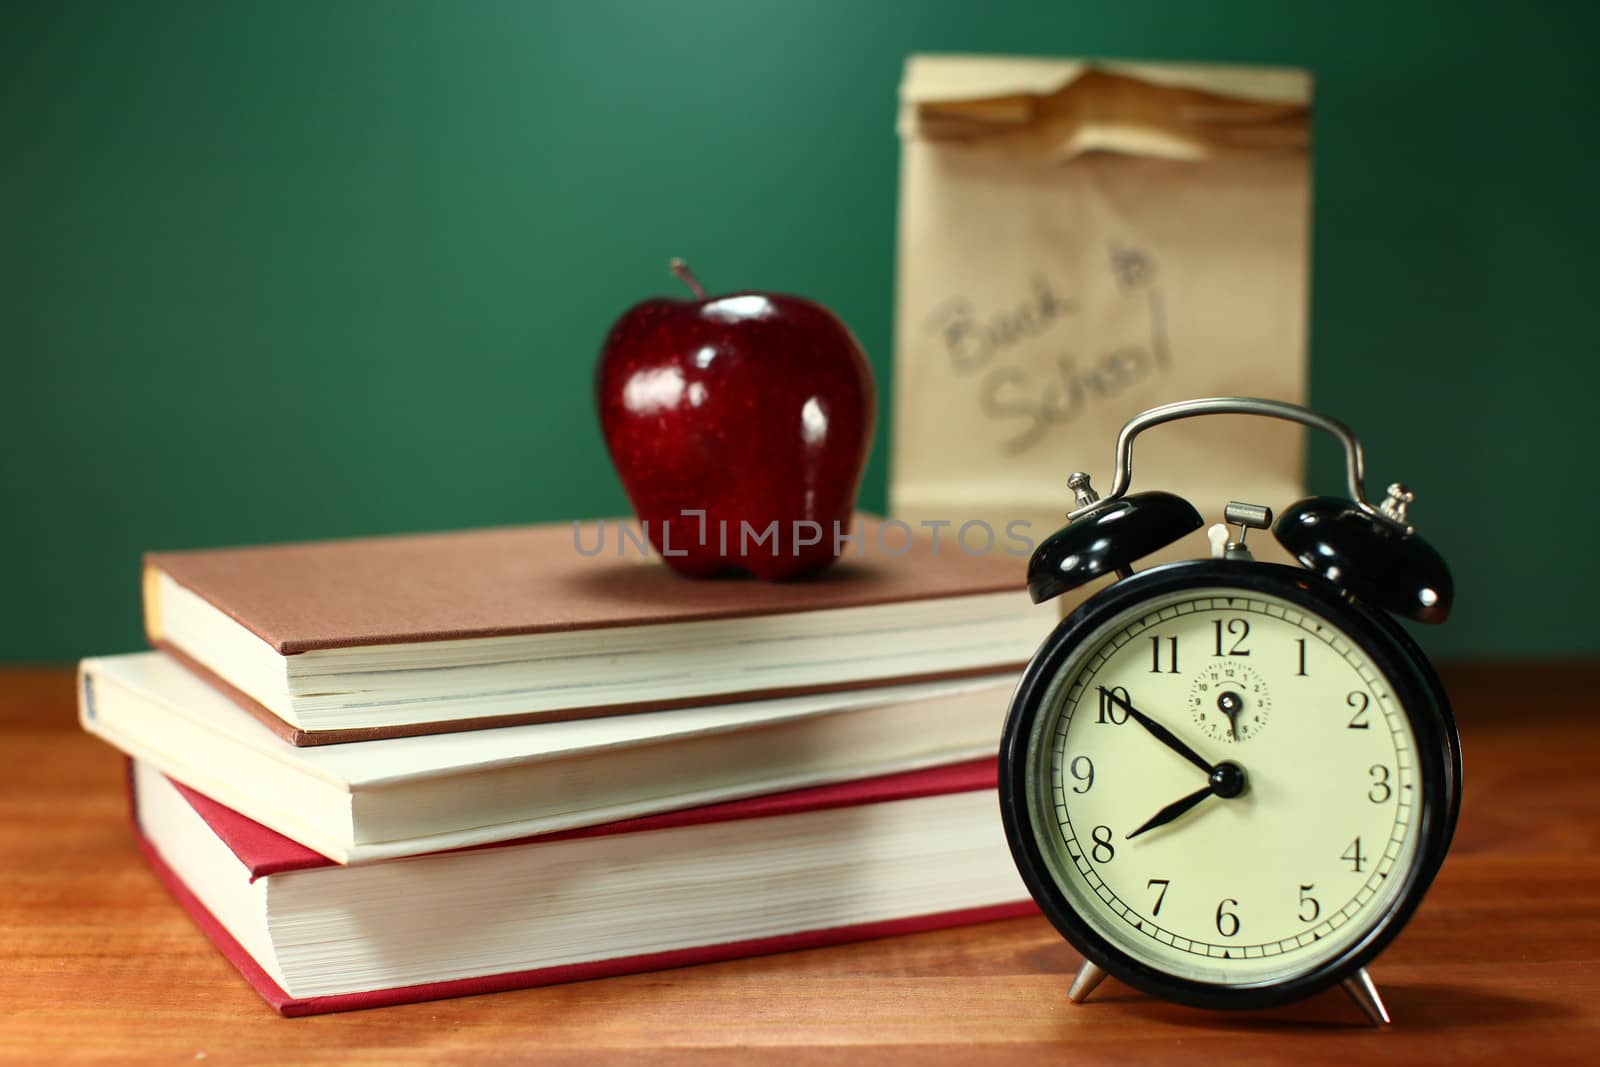 Lunch, Apple, Books and Clock on Desk at School by tobkatrina